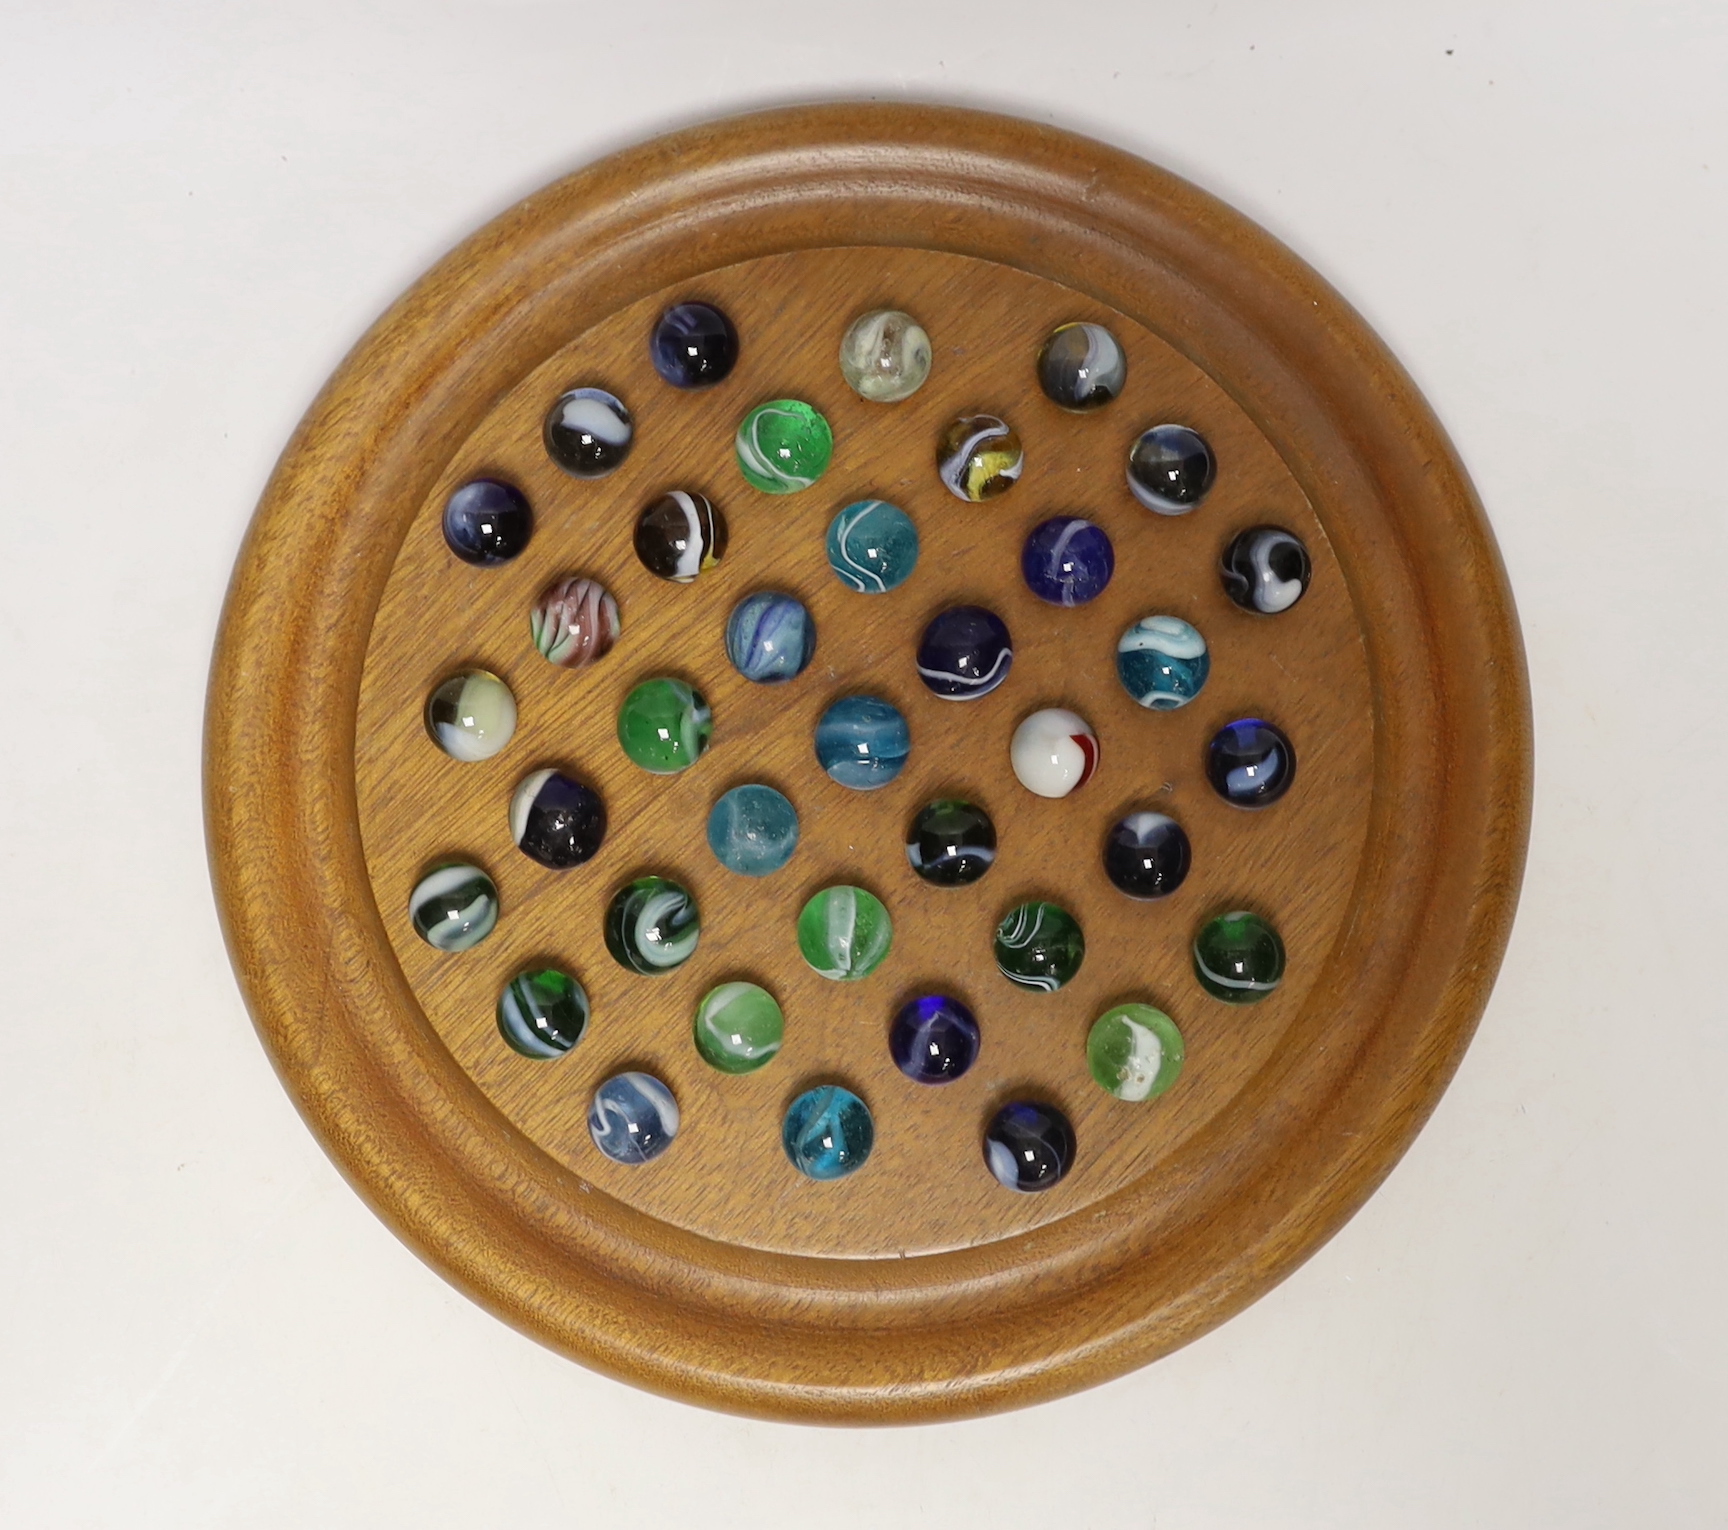 A solitaire board with glass marbles, board 25cm in diameter